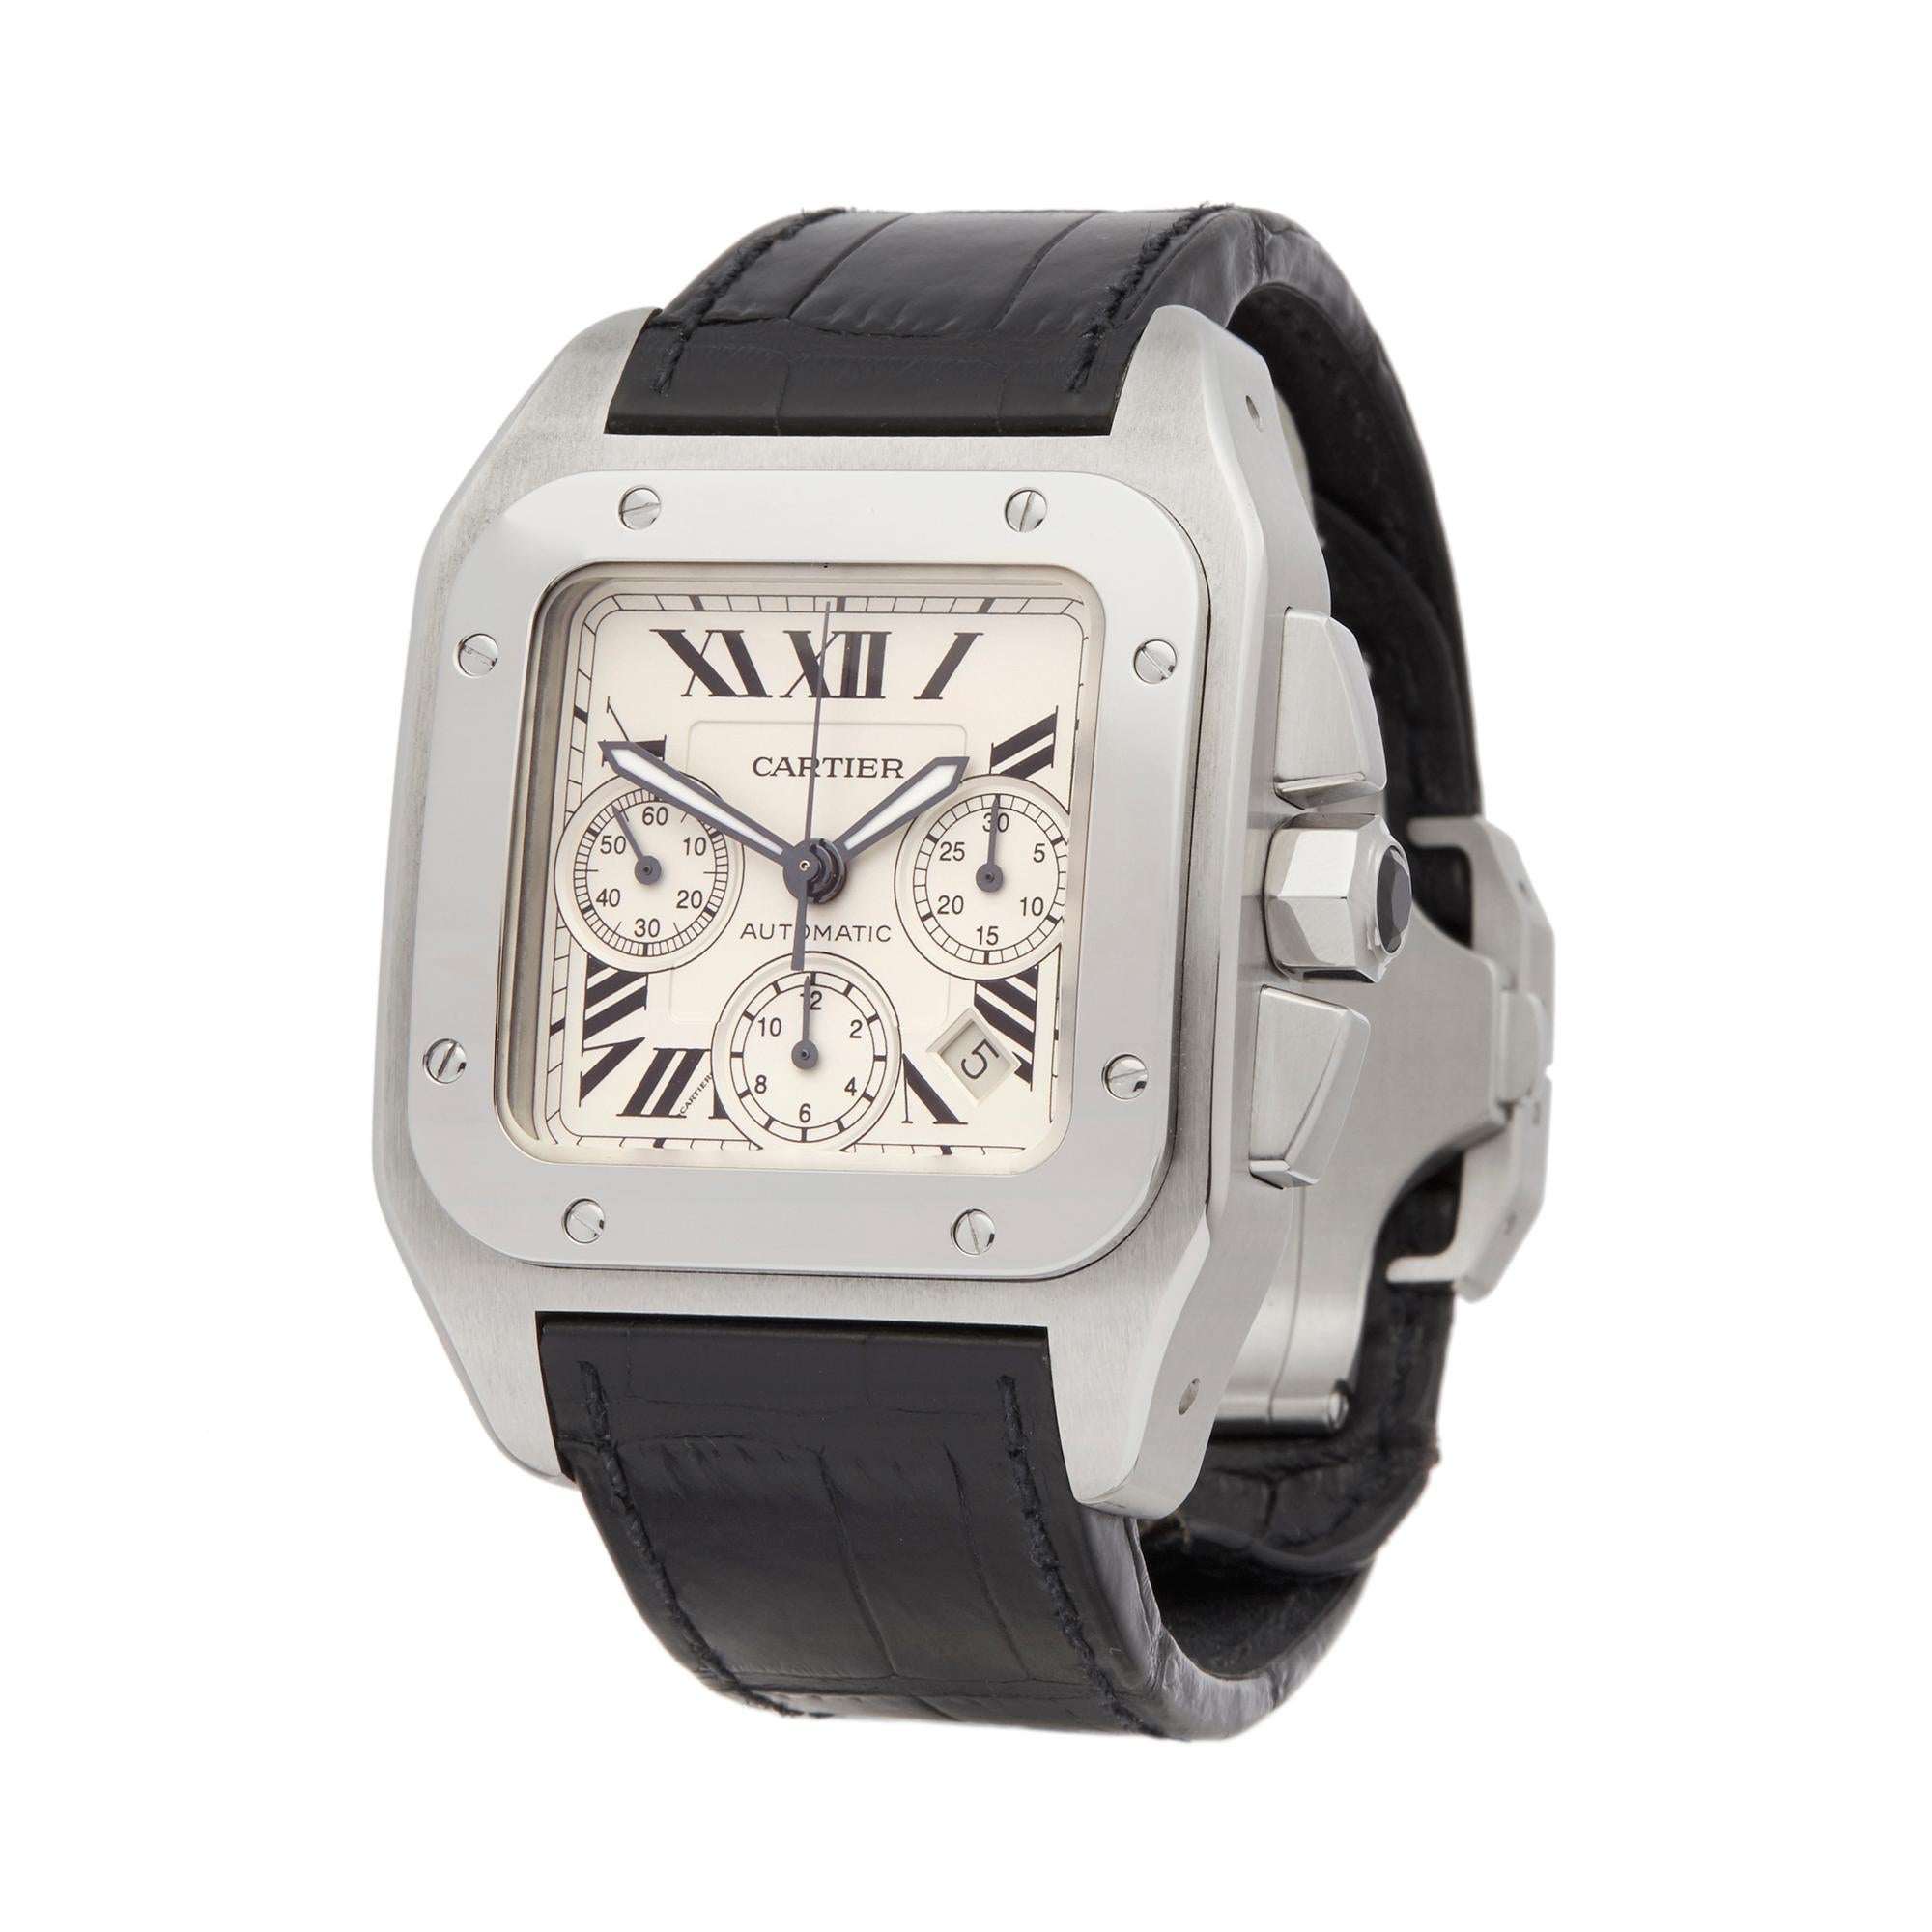 Reference: COM2022
Manufacturer: Cartier
Model: Santos 100
Model Reference: 2740
Age: 1st November 2015
Gender: Men's
Box and Papers: Box and Cartier Invoice
Dial: White Roman
Glass: Sapphire Crystal
Movement: Automatic
Water Resistance: To